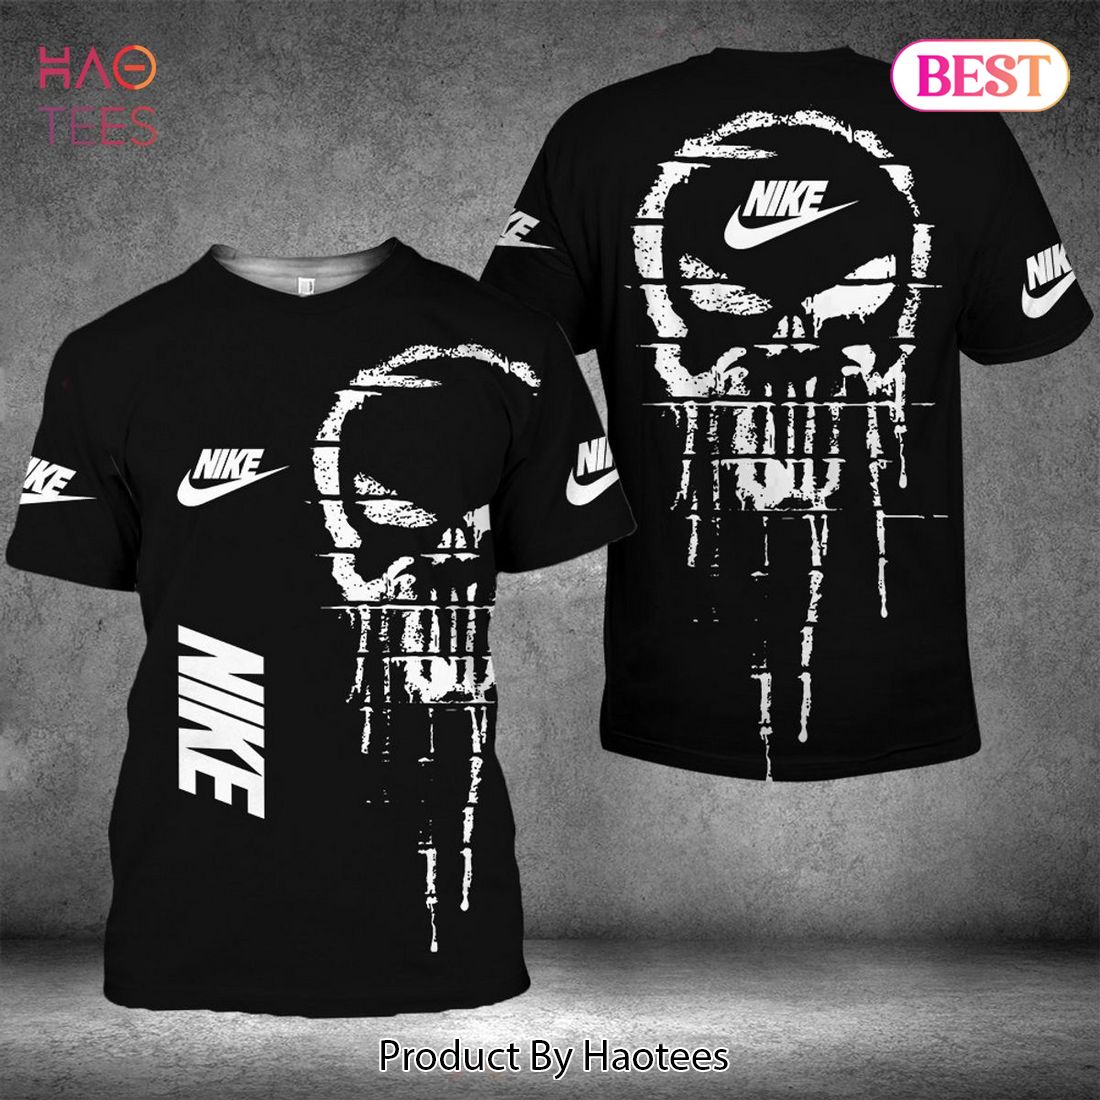 NEW Nike Full Black Background Luxury Brand 3D T-Shirt Limited Edition